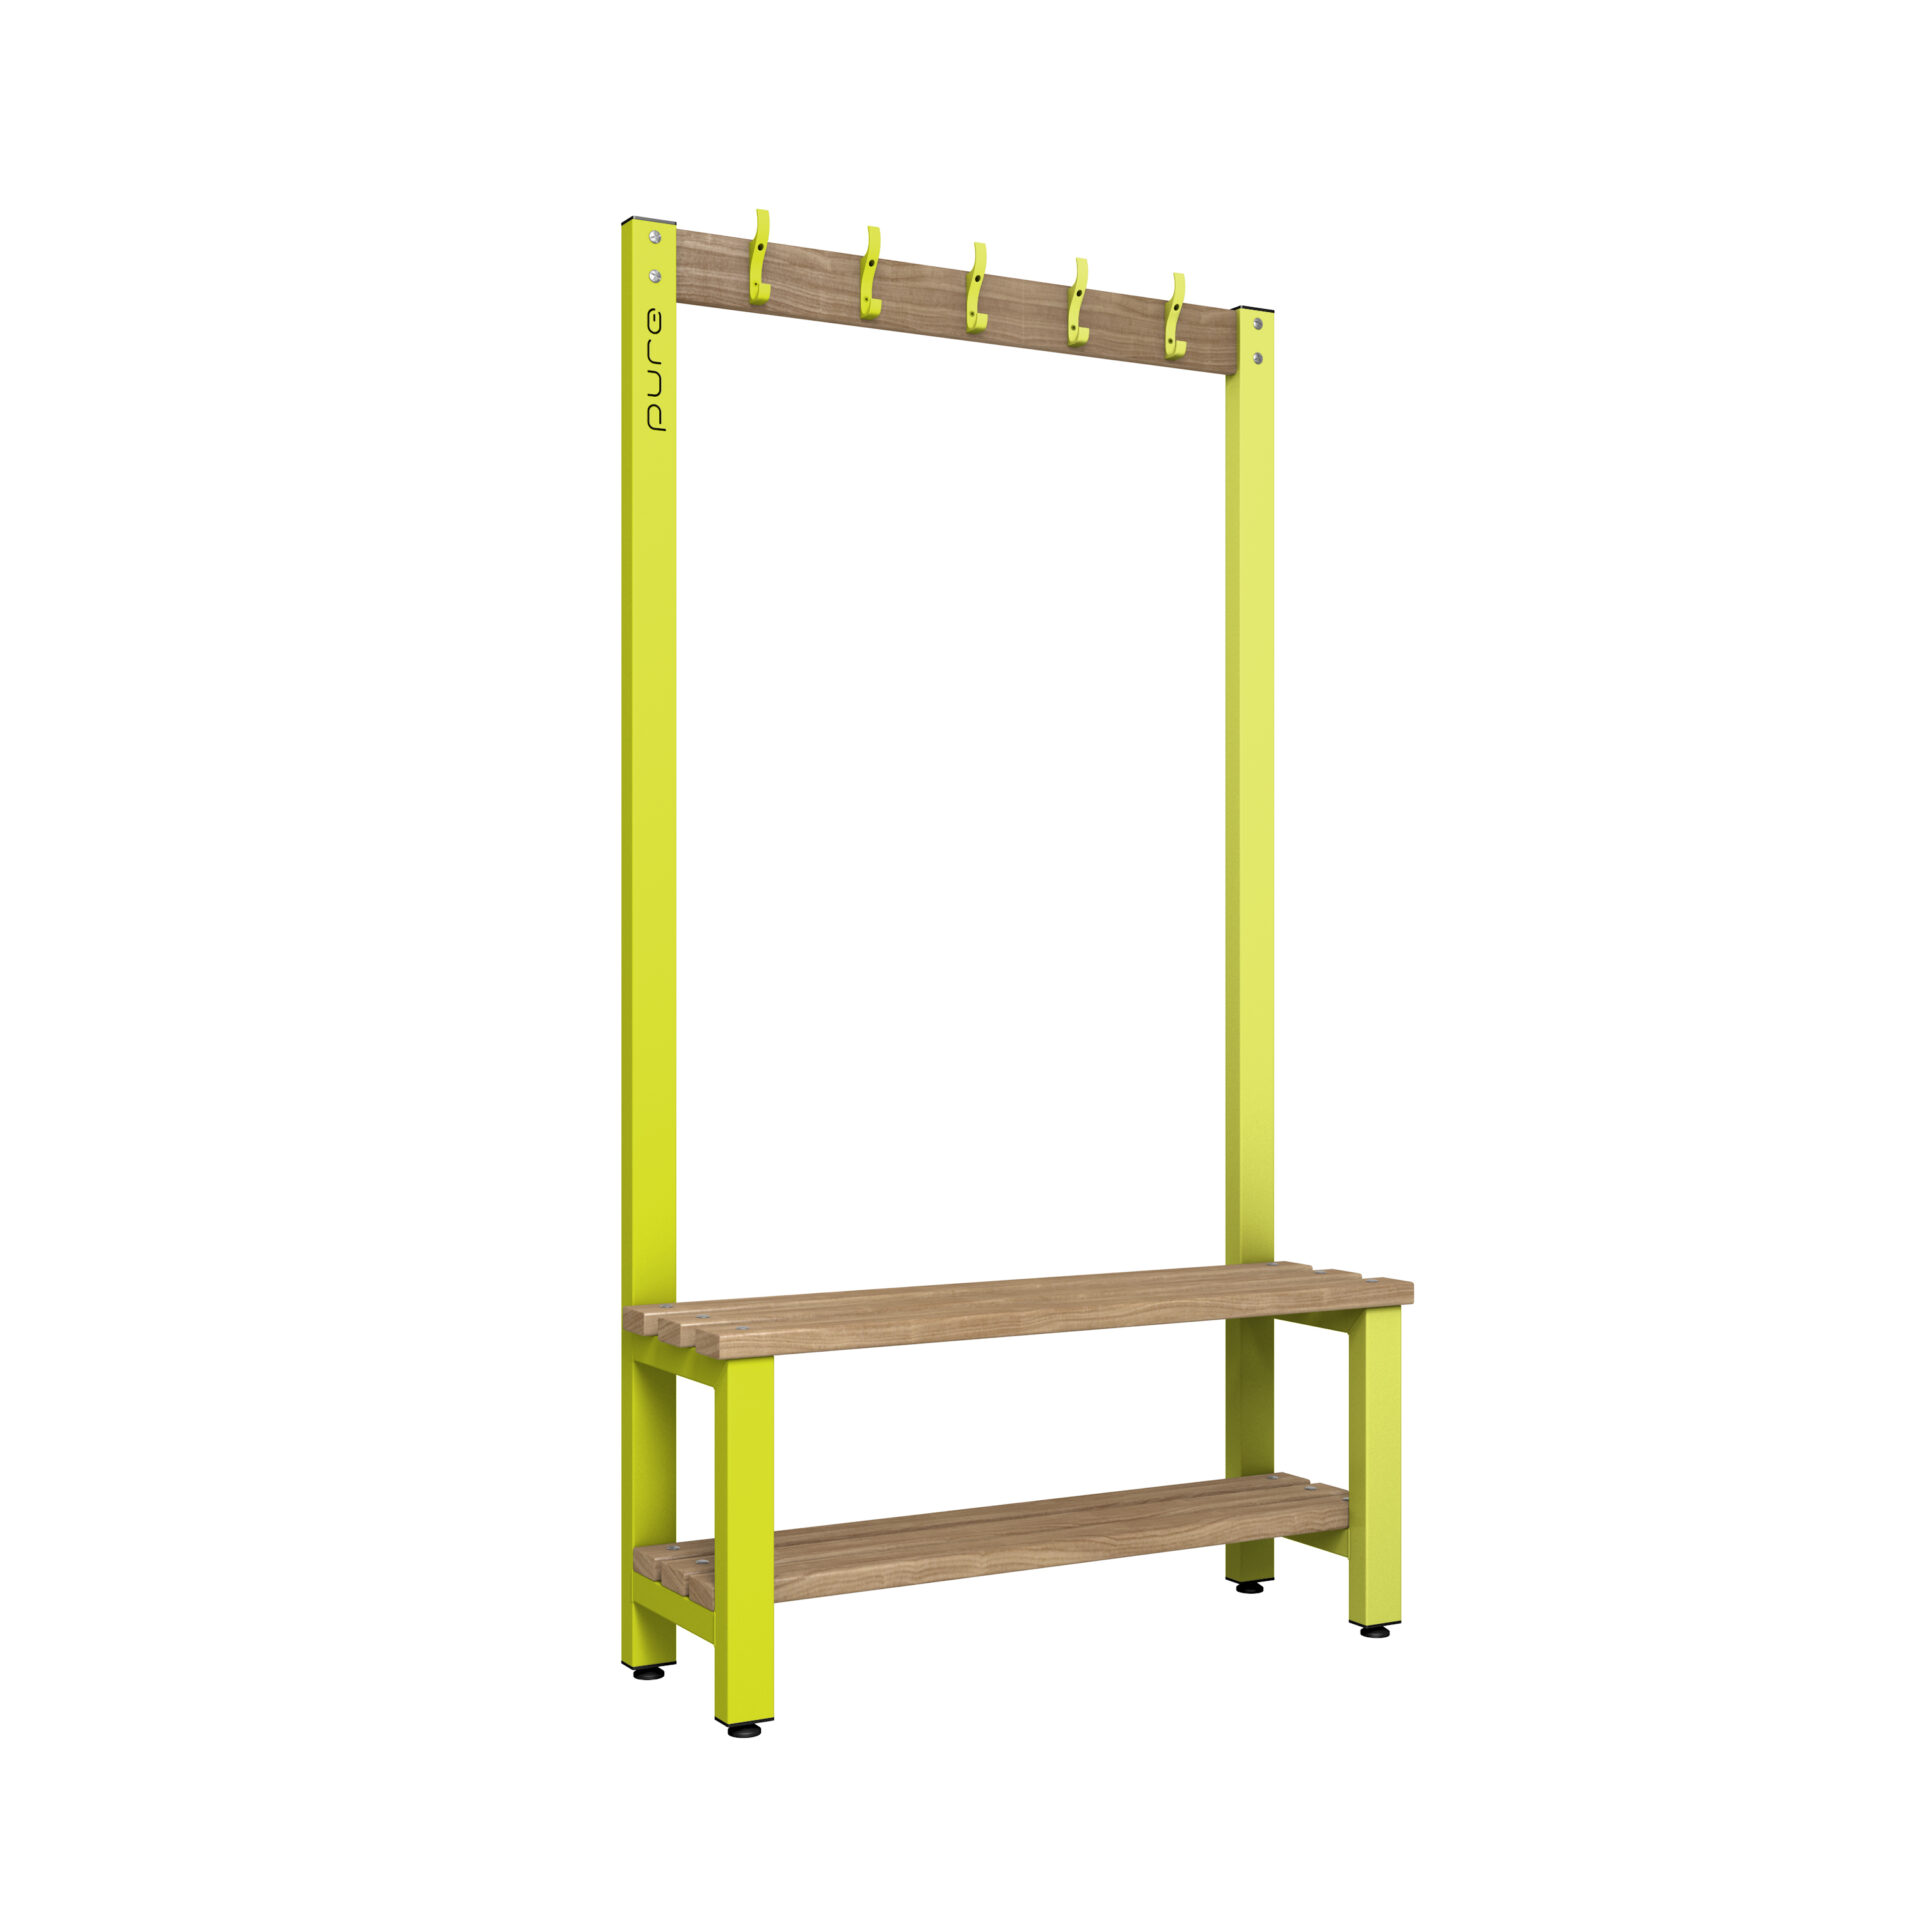 Pure Carbon Zero Single Sided 1000mm 5 Hook Bench With Shoe Shelf - Lime Light / Solid Timber